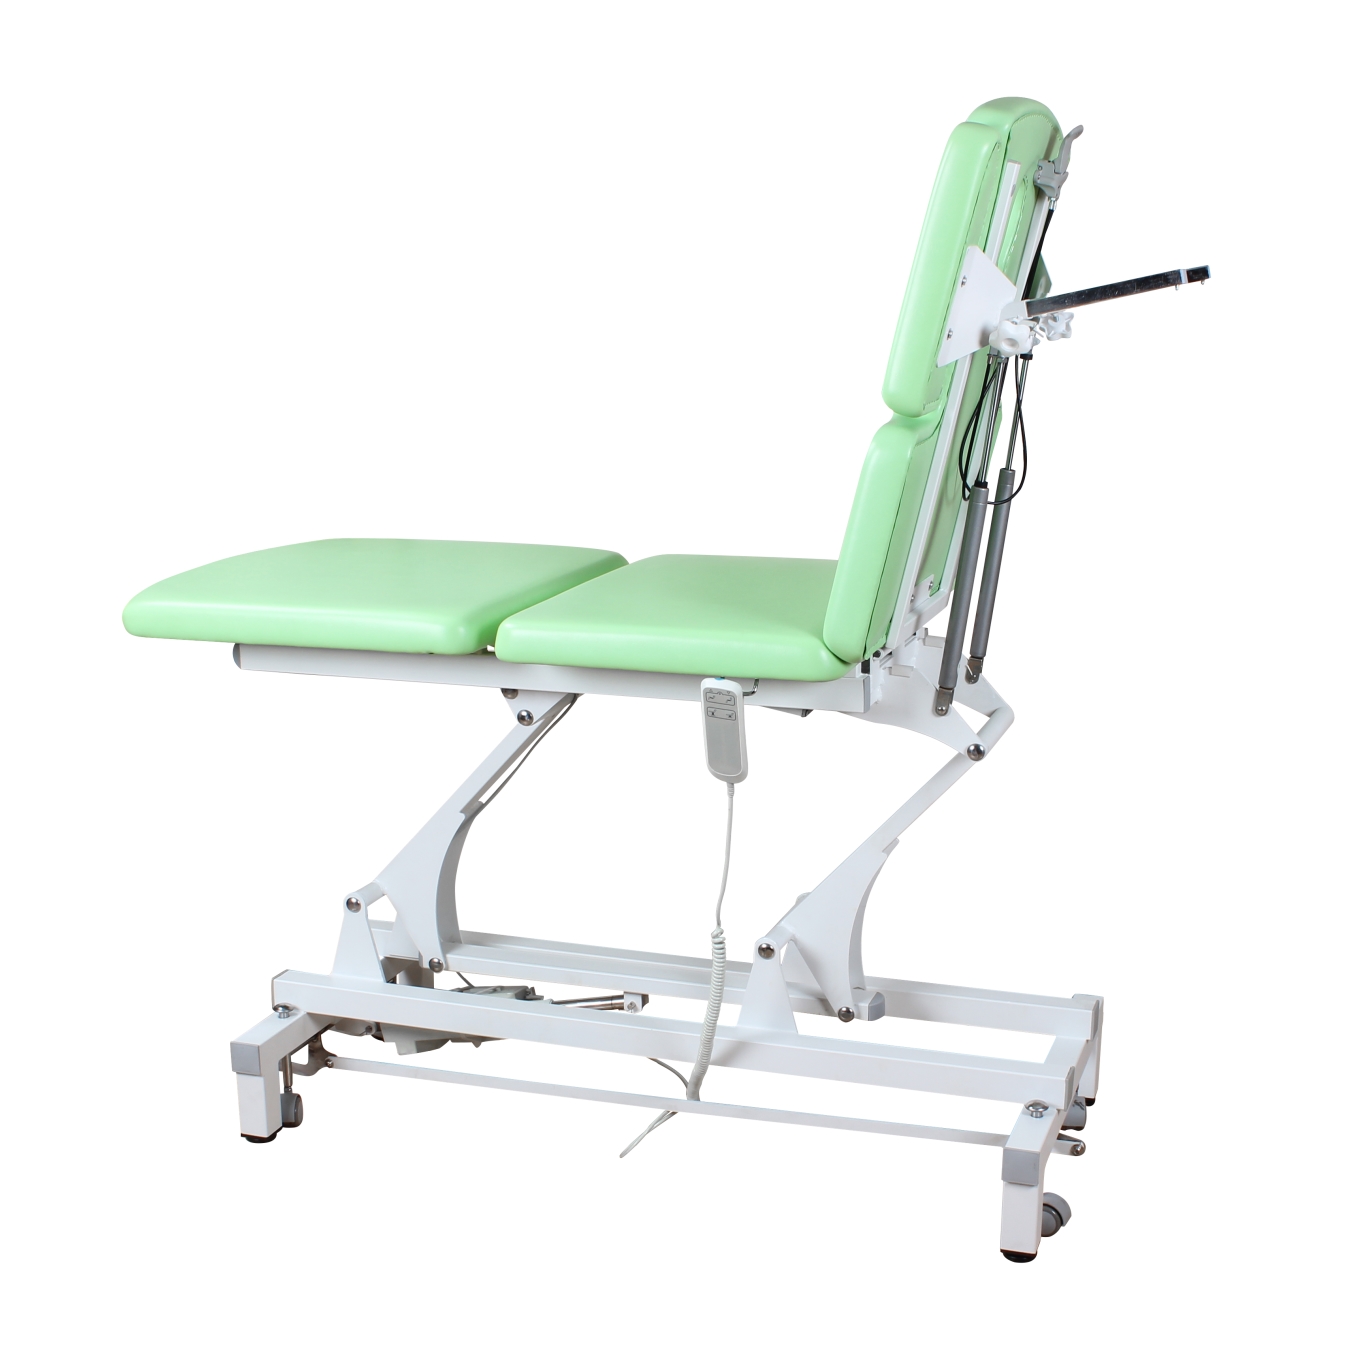 DP-S803 Osteopathic Treatment Examination Table